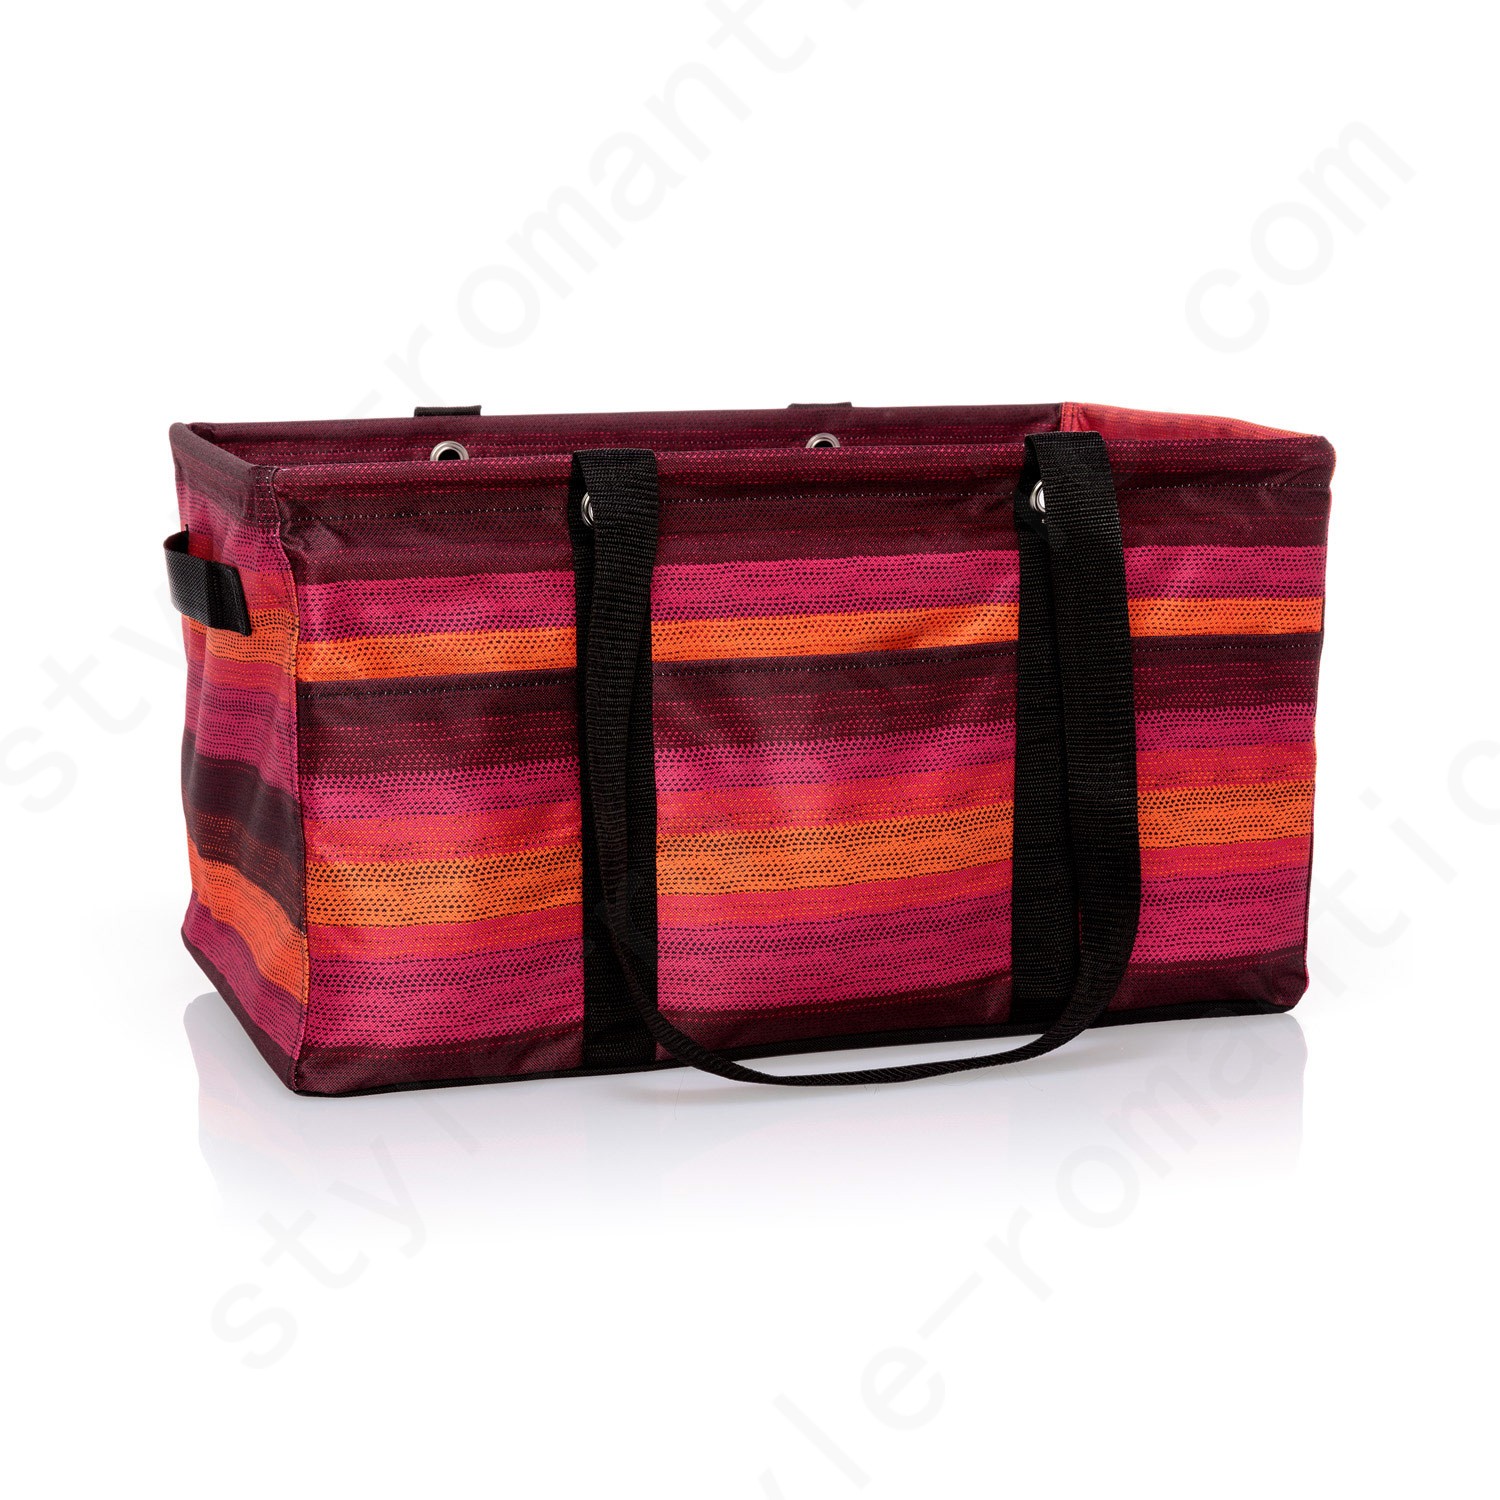 Thirty-One Gifts Deluxe Utility Tote - Ombre Stripe Bag Accessories - Thirty-One Gifts Deluxe Utility Tote - Ombre Stripe Bag Accessories